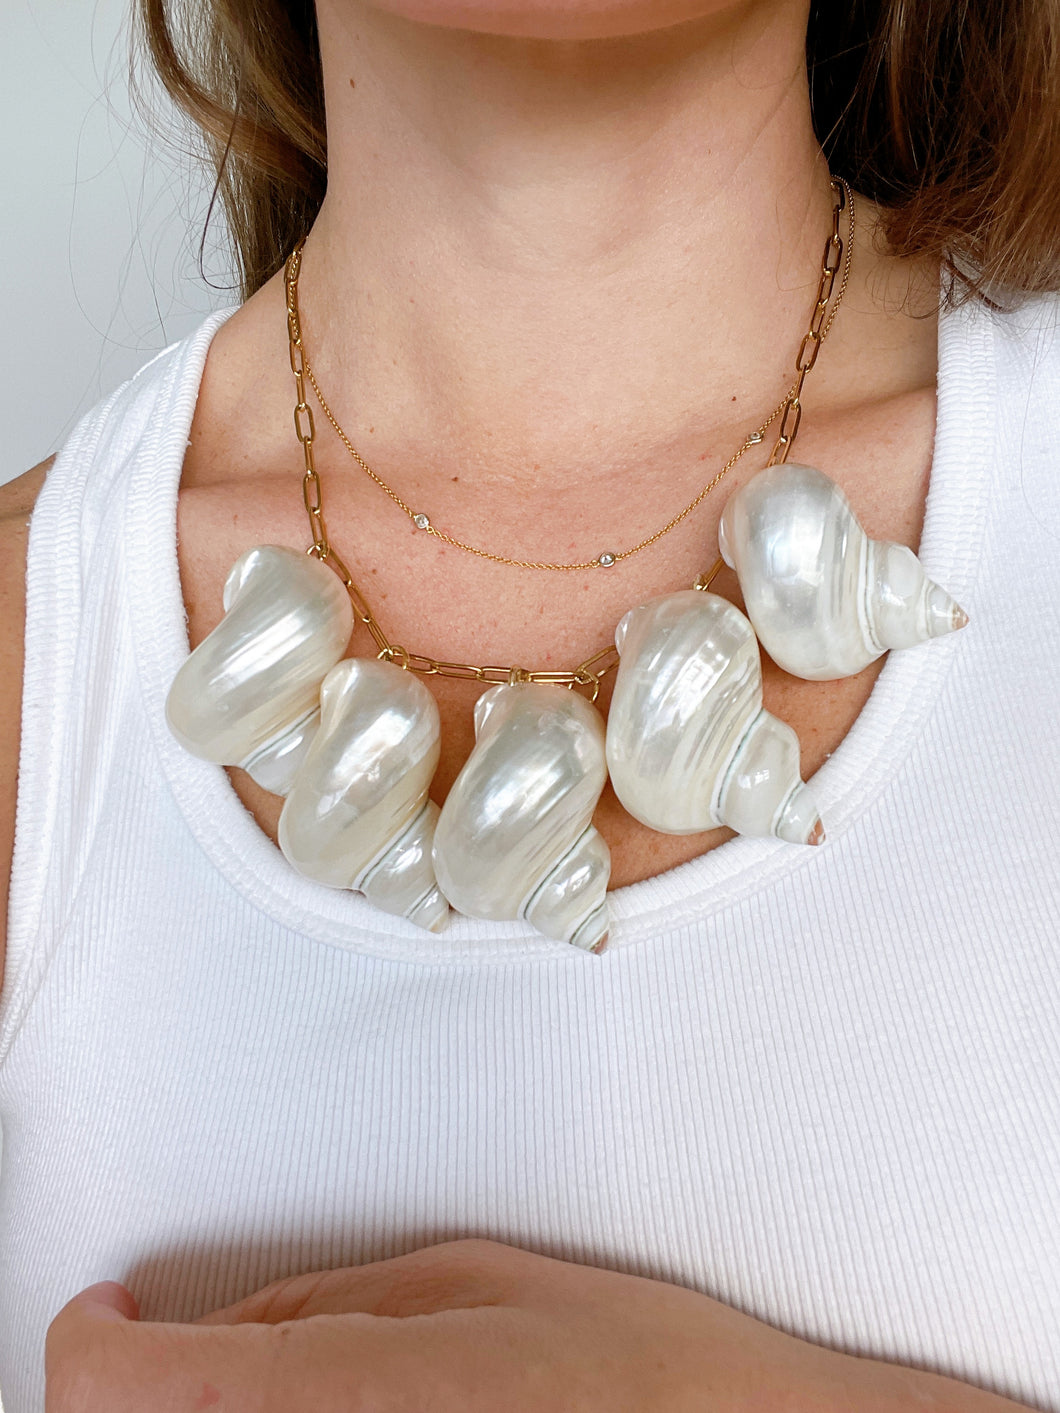 The Grayt Shell Necklace